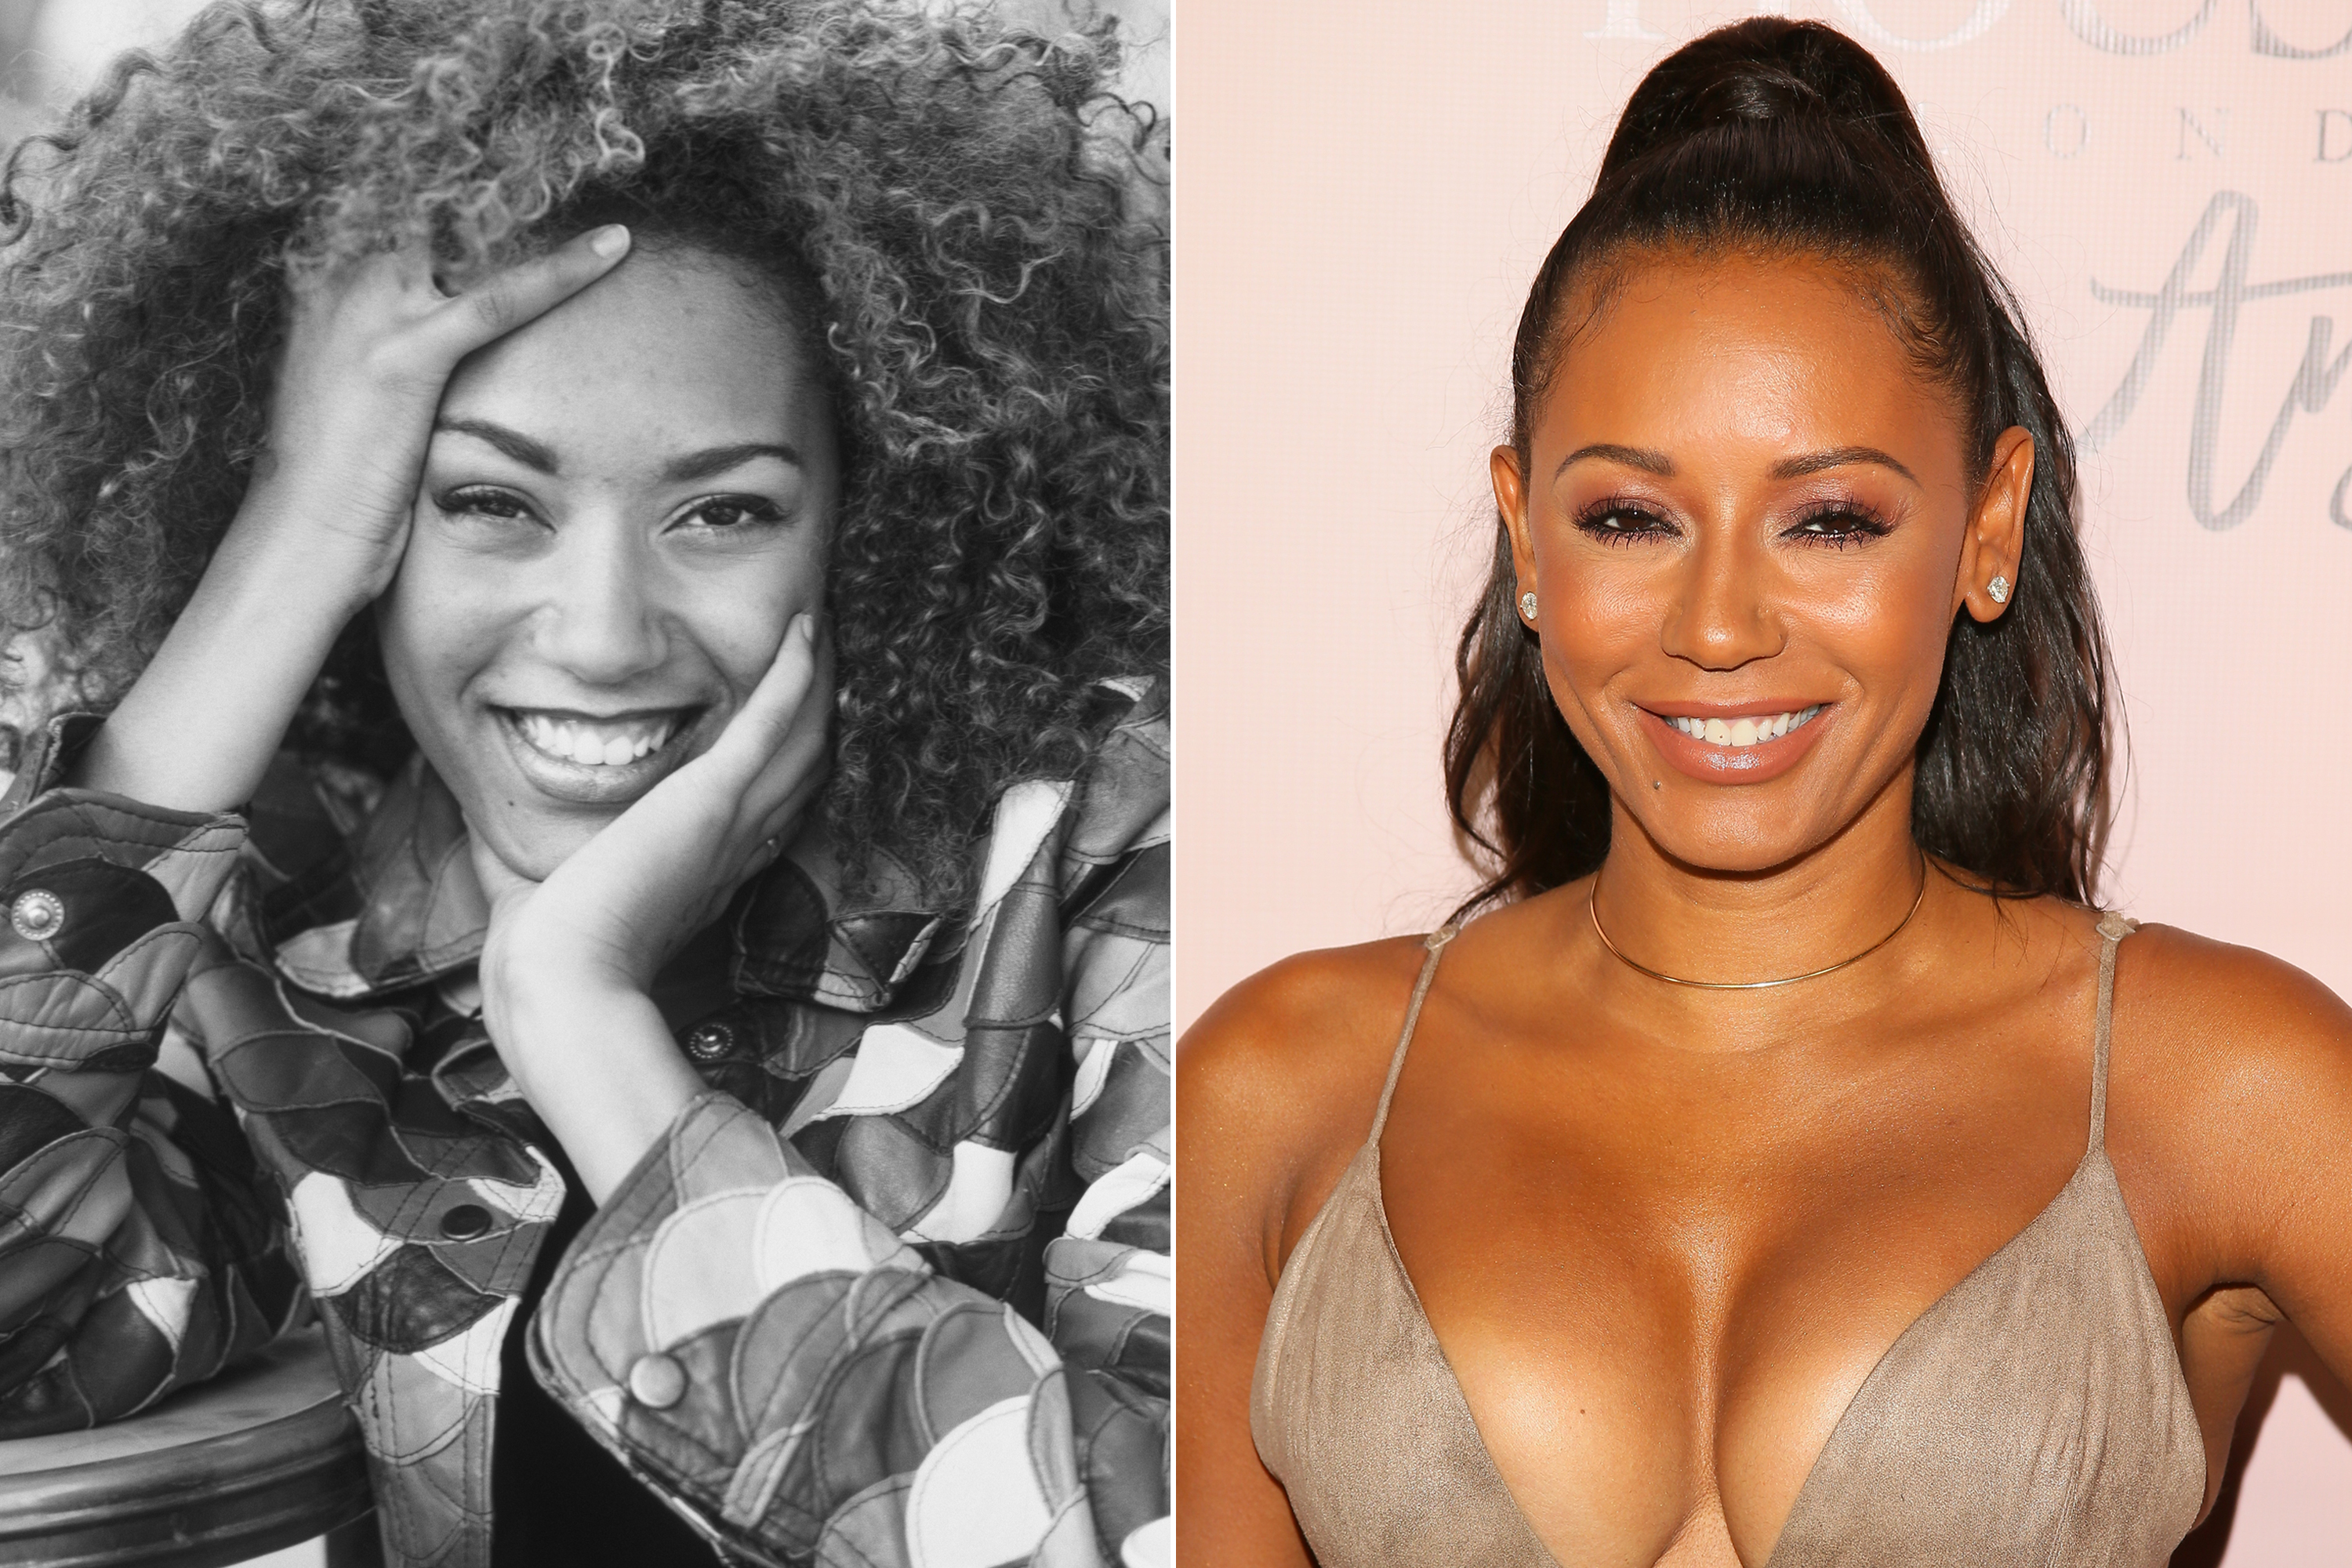 Melanie Brown, aka Scary Spice, in 1996 and 2016.